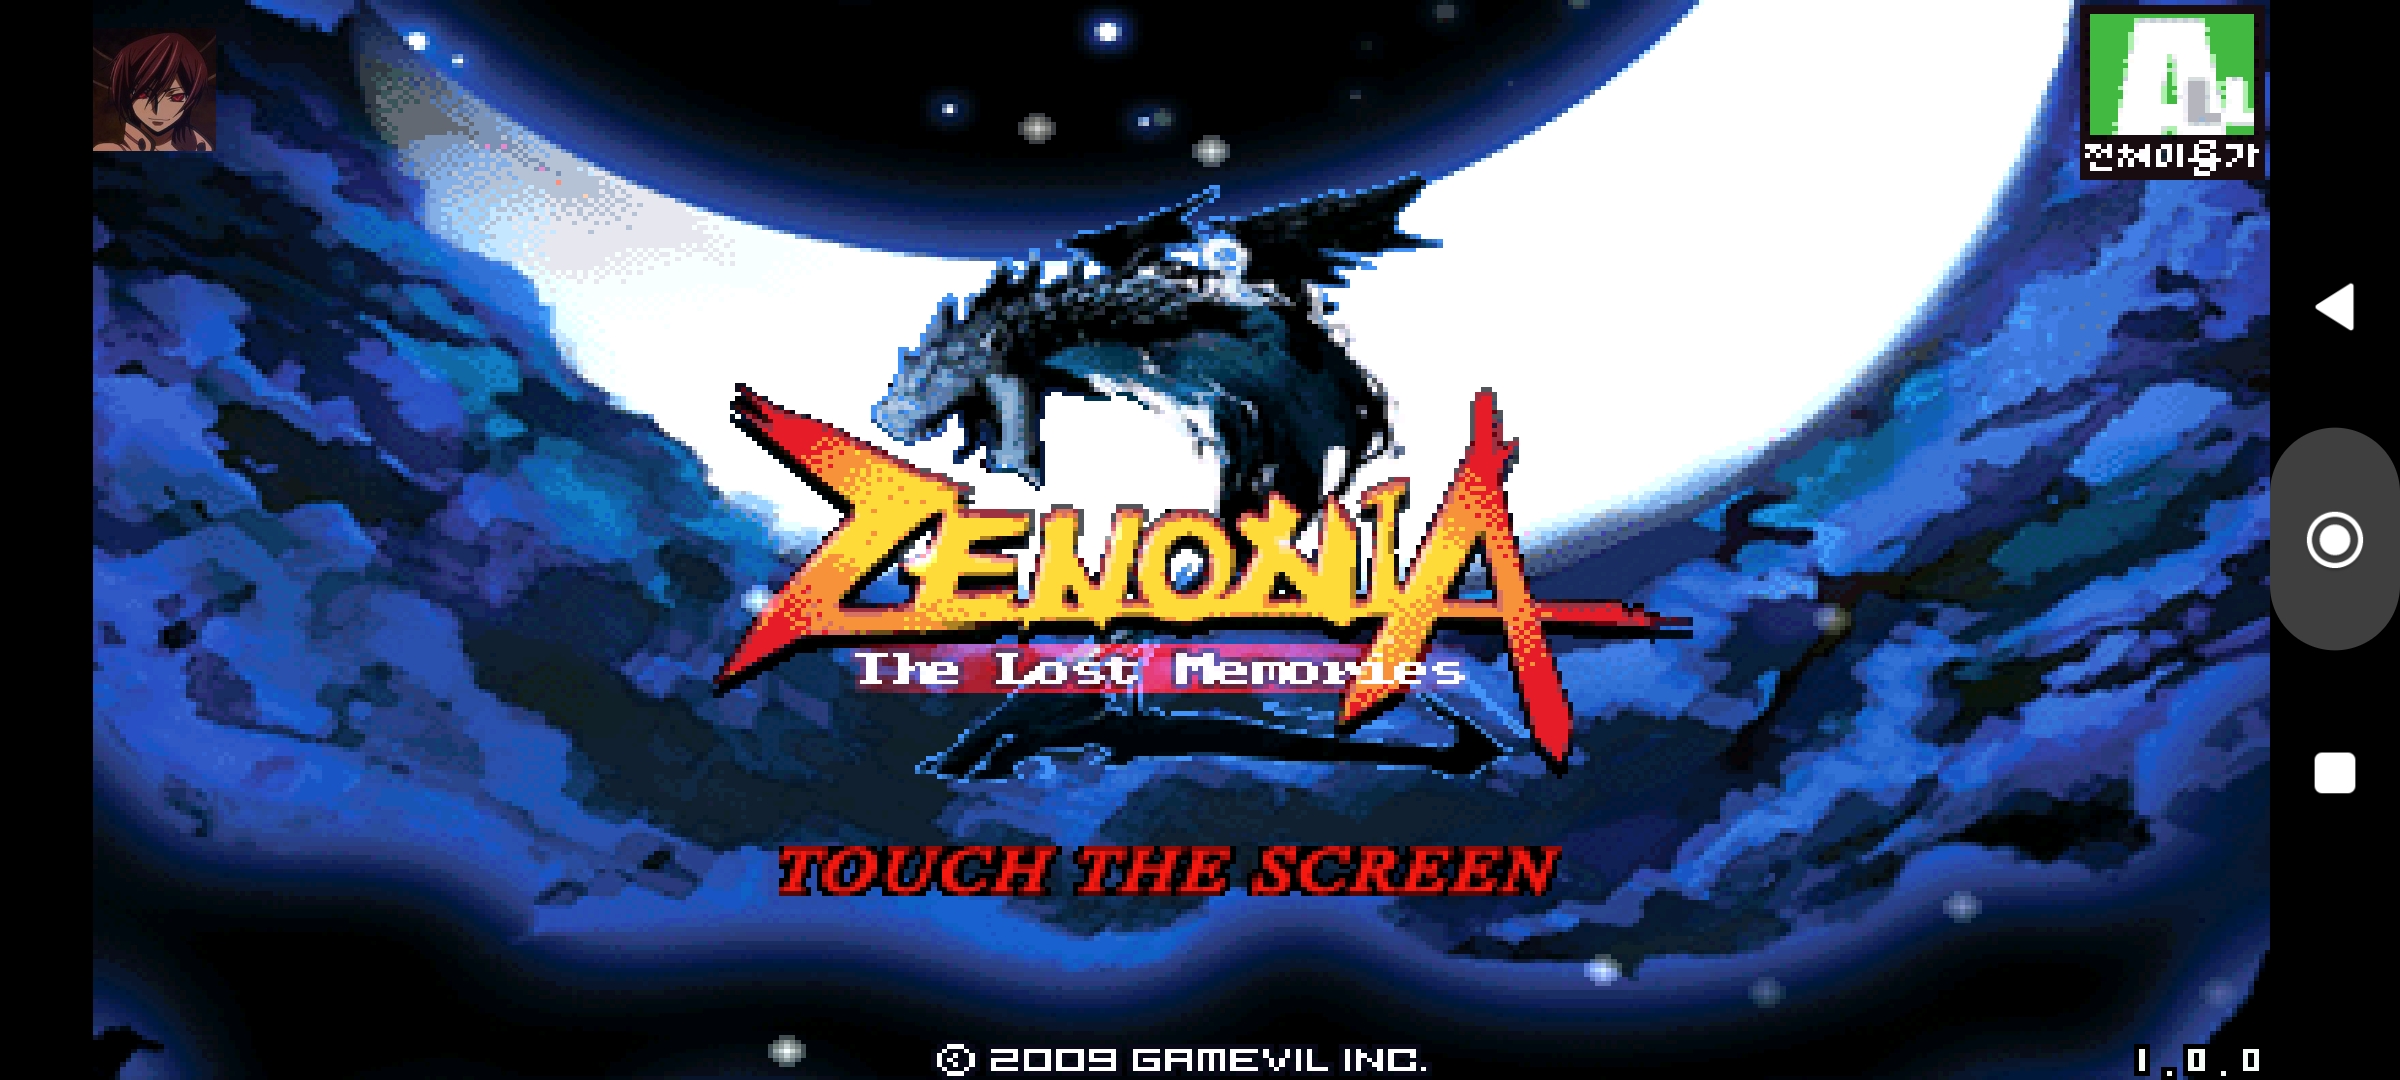 [Game Android] Zenonia 2: The Lost Memories